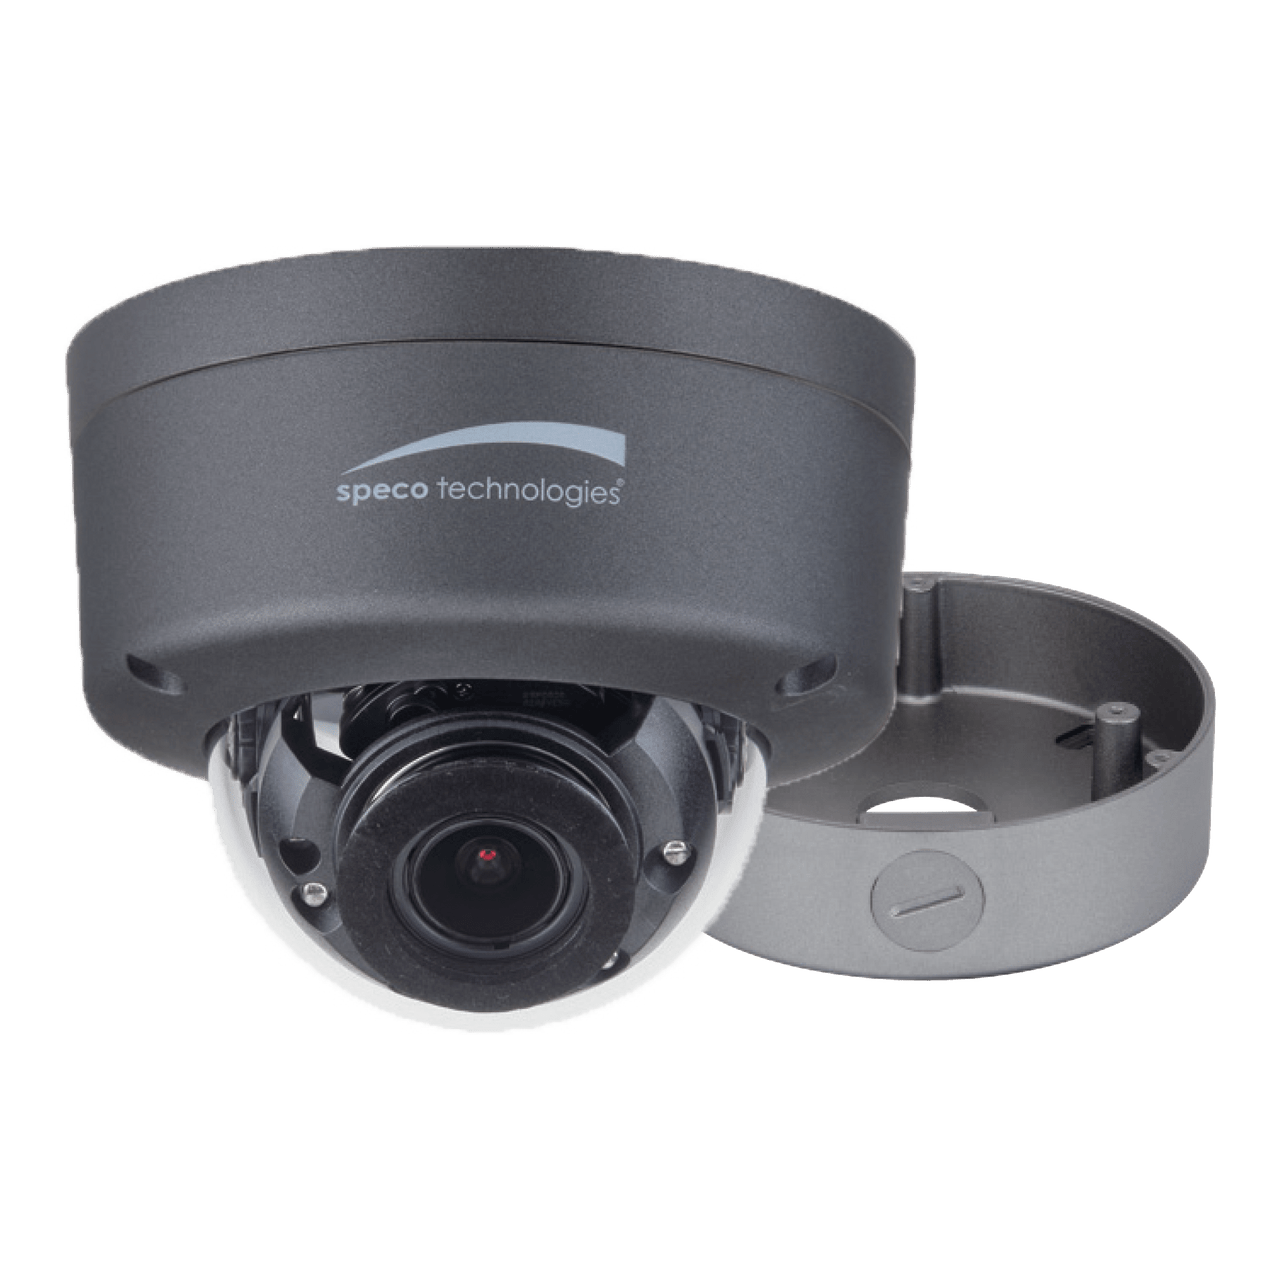 Speco Technologies SPE-HFD4M 4MP HD-TVI FIT Dome Camera, 2.8-12mm Motorized lens, Grey Housing, Included Junc (SPE-HFD4M)